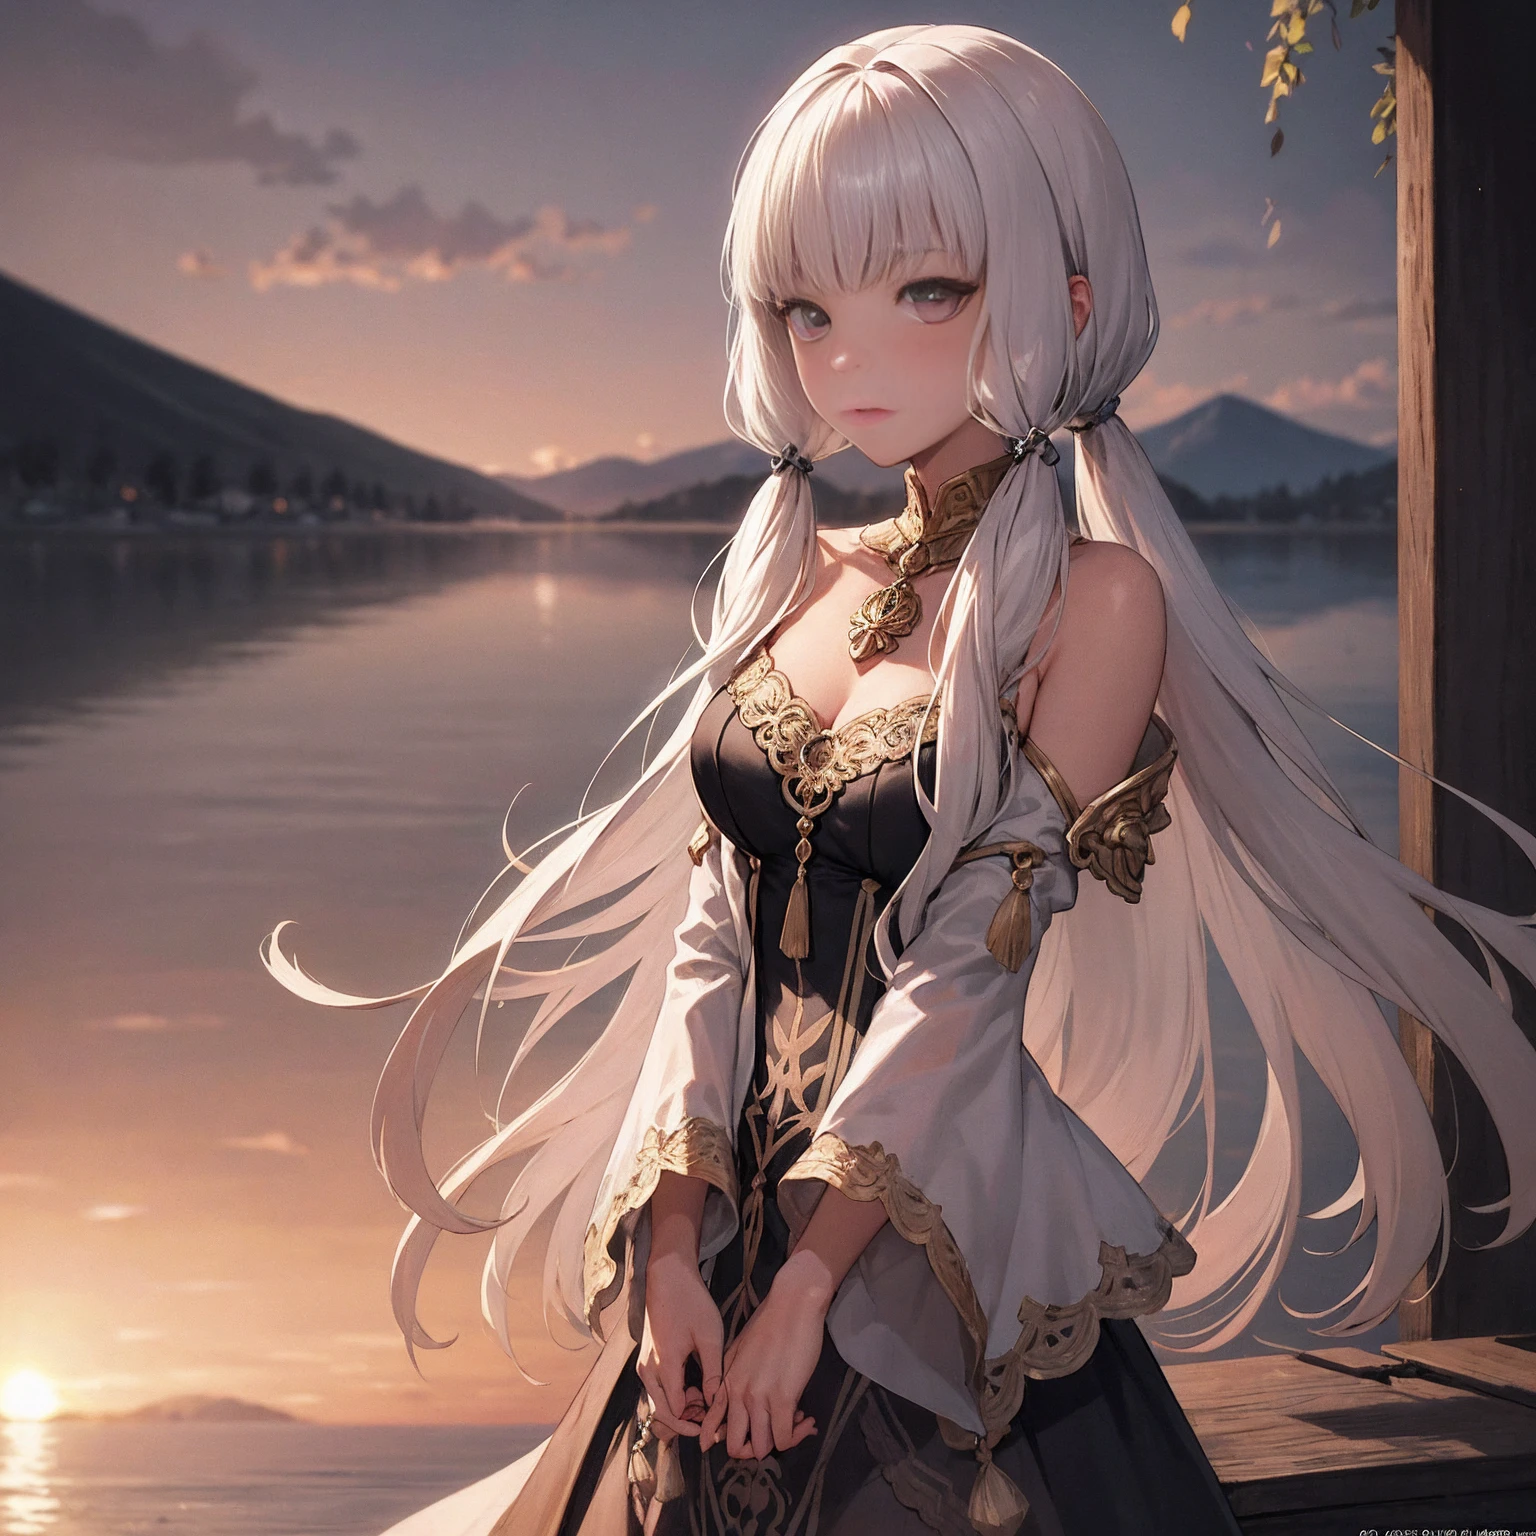 Lysithea von Ordelia is depicted in this artwork as a serene and captivating figure. She is portrayed as a young girl with long, straight hair and mesmerizing eyes. Her hair is styled in low twintails, giving her a unique appearance. The artwork is presented in a monochrome greyscale, with the exception of a few elements.

Lysithea is shown in an upper body shot, wearing a flowing dress that adds to her poised posture. Her porcelain skin is accentuated by a subtle blush, giving her a delicate and ethereal look. She is adorned with a crystal pendant, which adds a touch of elegance to her overall appearance.

The artwork takes place during the golden hour, as indicated by the warm tones, sun flare, and soft shadows. This lighting technique enhances the vibrant colors, creating a painterly effect that adds to the dreamy atmosphere of the piece. The scene is set against a scenic lake, with distant mountains and a willow tree. The calm water reflects the sunlit clouds, contributing to the peaceful ambiance and idyllic sunset.

The level of detail in this official art is remarkable, with every element meticulously rendered. The artwork is presented in unity 8k wallpaper resolution, allowing viewers to appreciate the intricate details. Additionally, the zentangle and mandala elements add a touch of complexity to the overall composition.